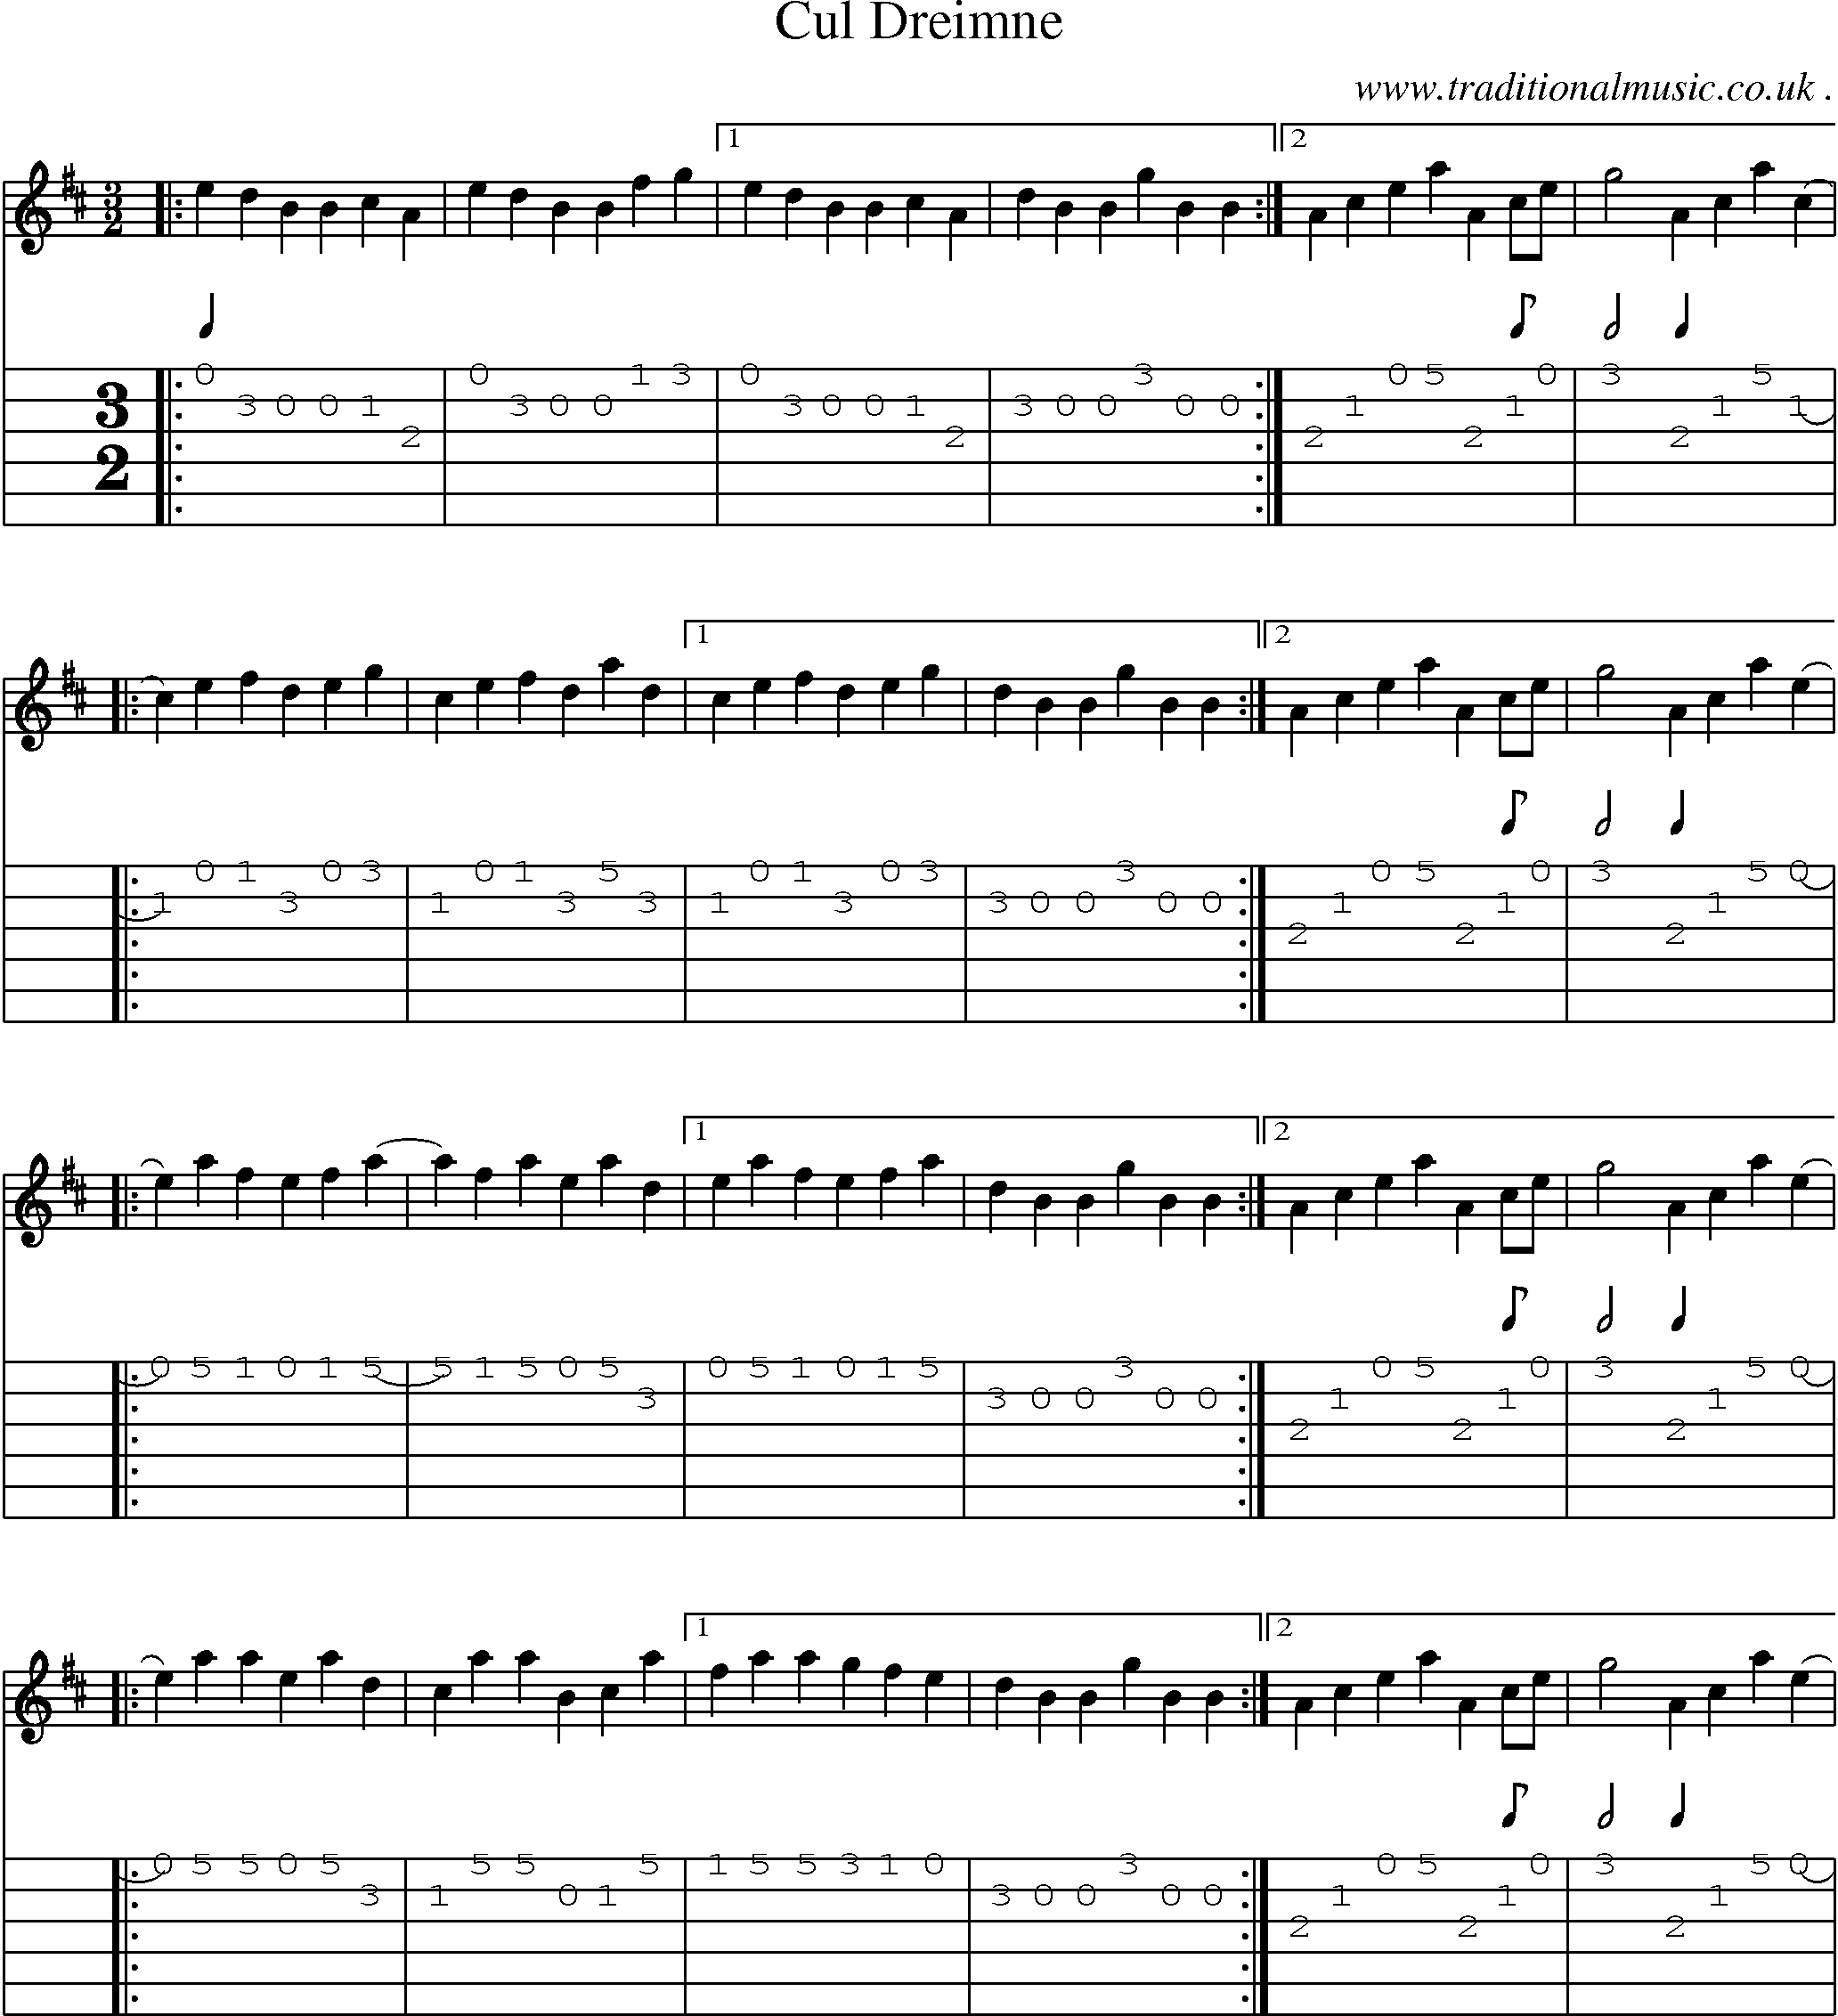 Sheet-Music and Guitar Tabs for Cul Dreimne